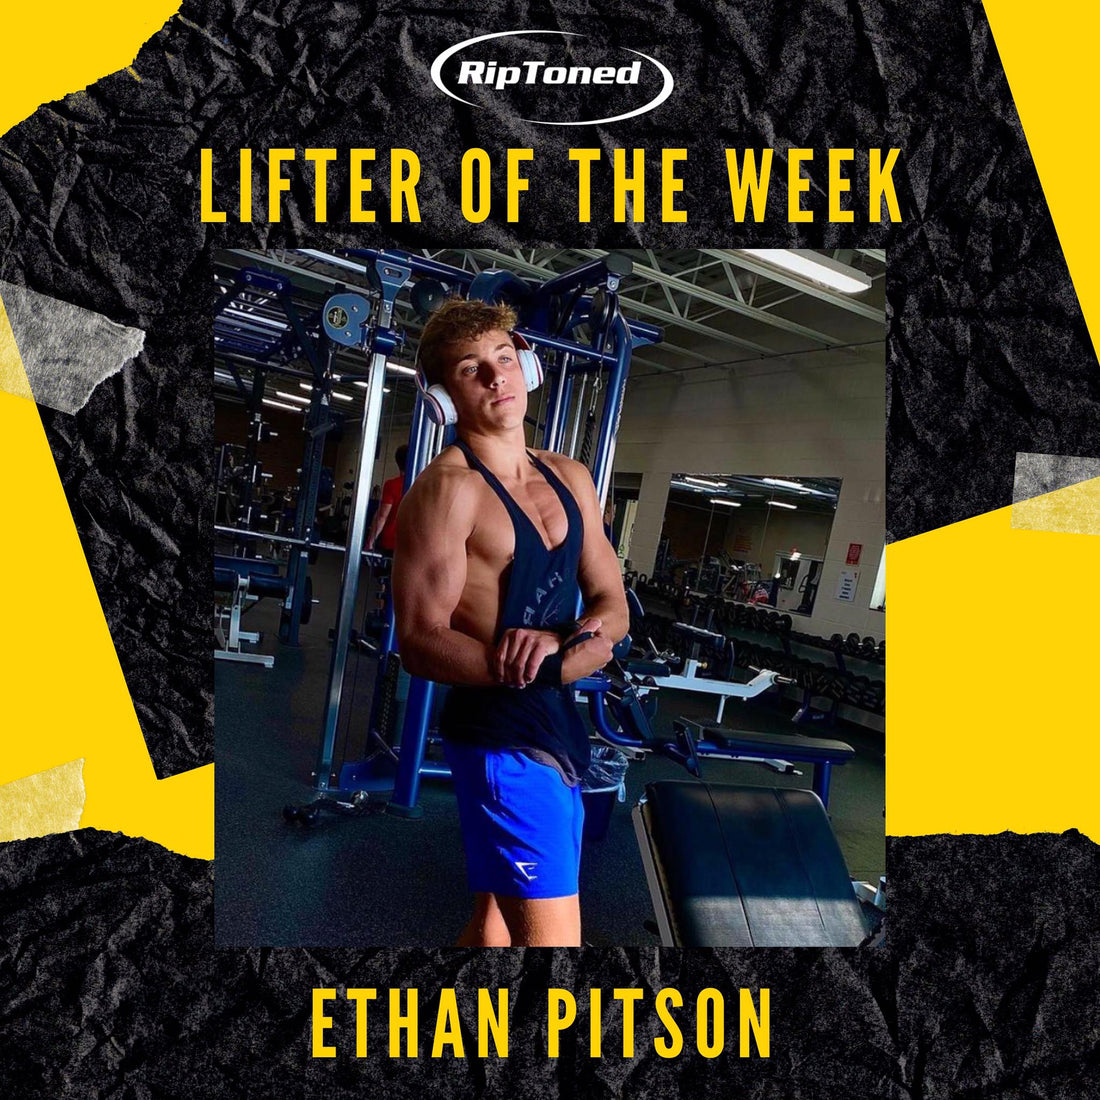 Lifter of the Week - Ethan Pitson - Rip Toned